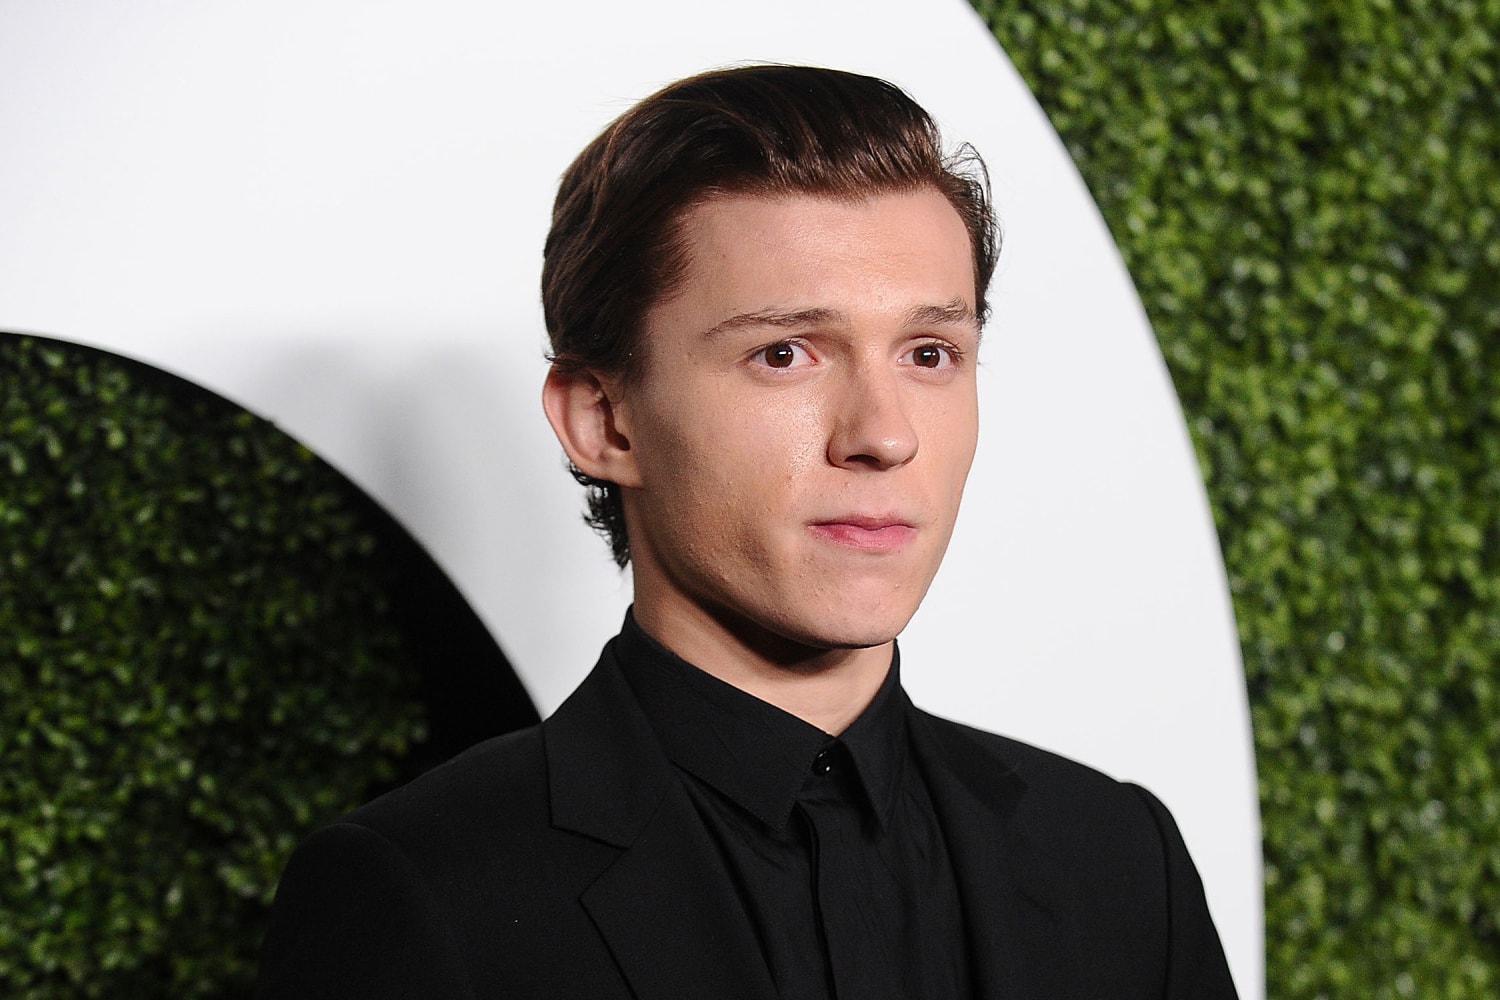 UNCHARTED Movie: Tom Holland To Play Young Nathan Drake For Shawn Levy